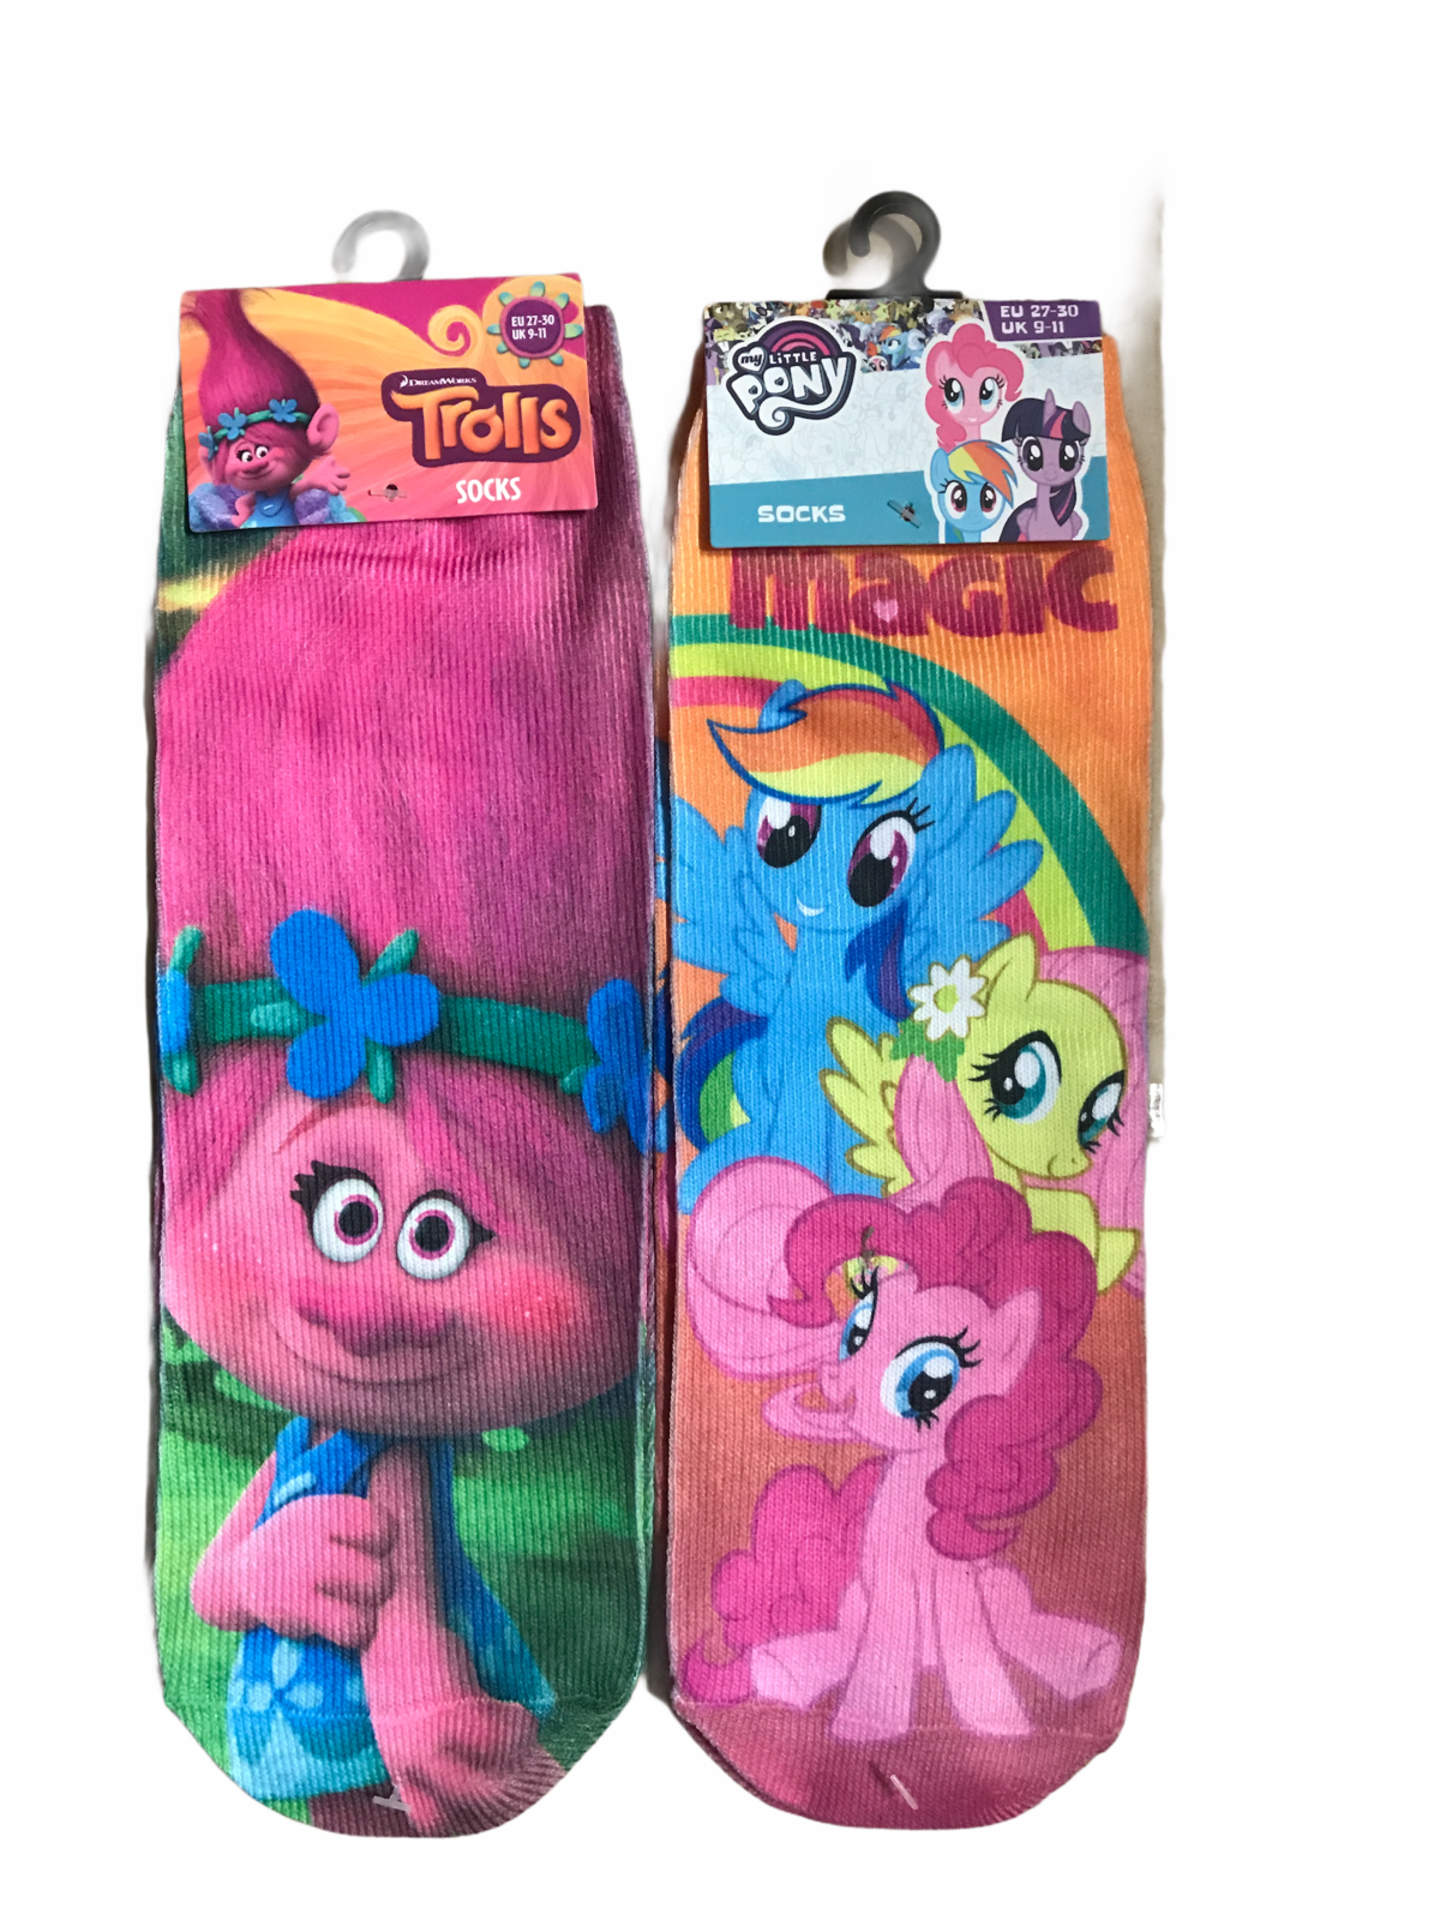 24 Pairs of Kids Socks - Mixed sizes and Character - Image 5 of 5